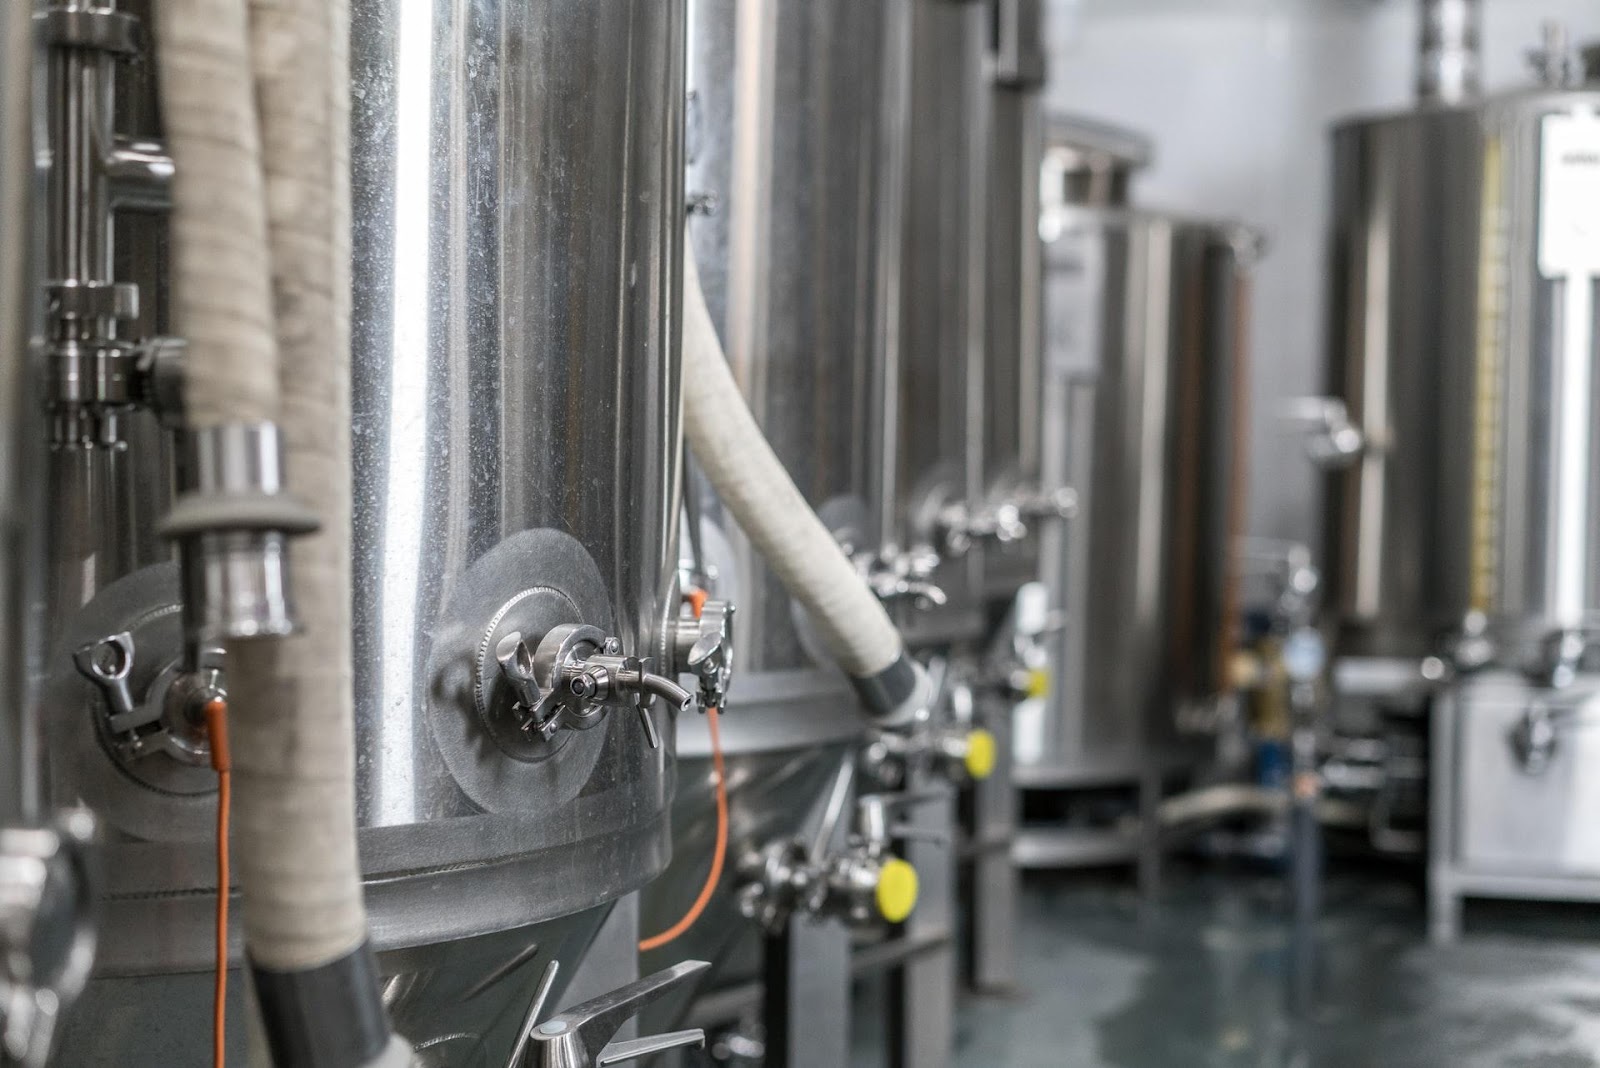 A picture of some brewery equipment.